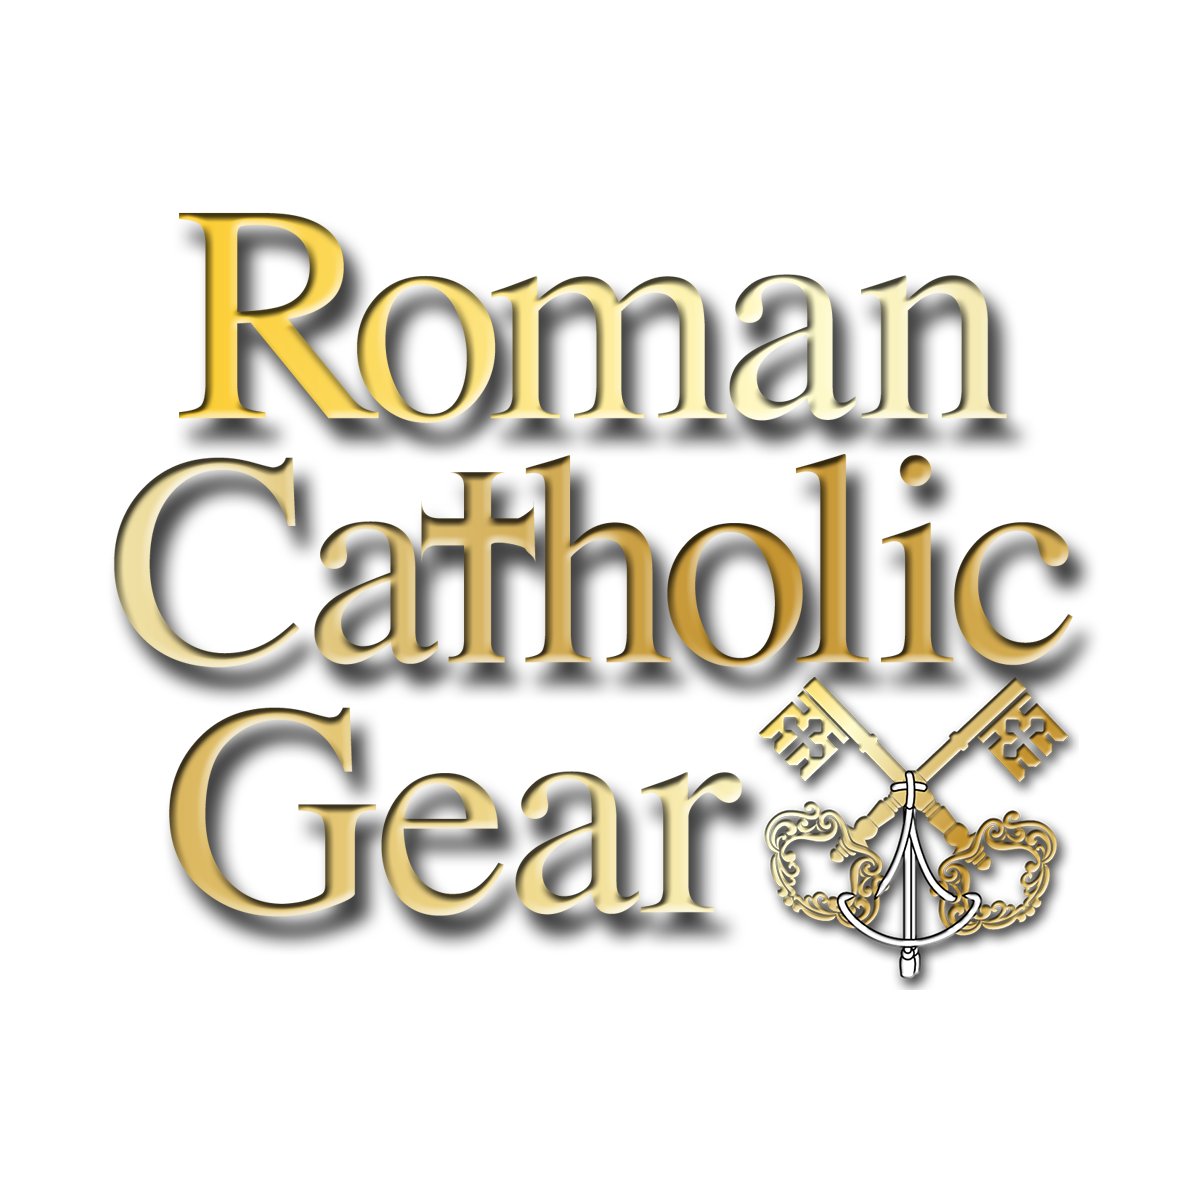 https://t.co/tOYbxdkDEw is the official website for the gear to help you with your basic training in holiness, and for engaging in spiritual warfare.